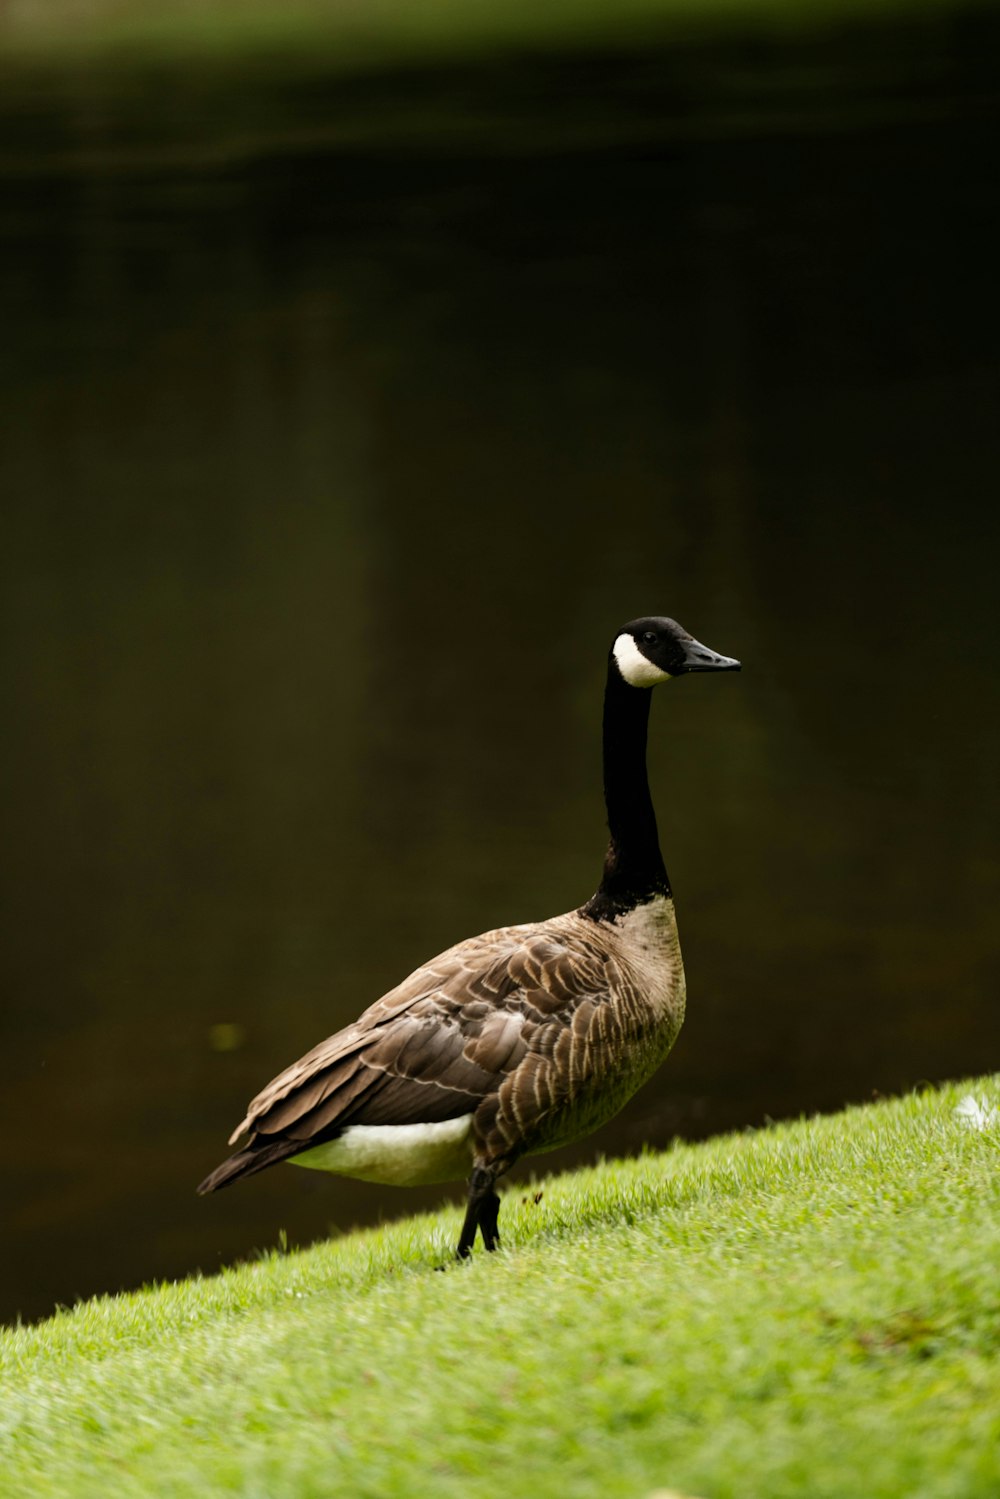 a goose standing on grass